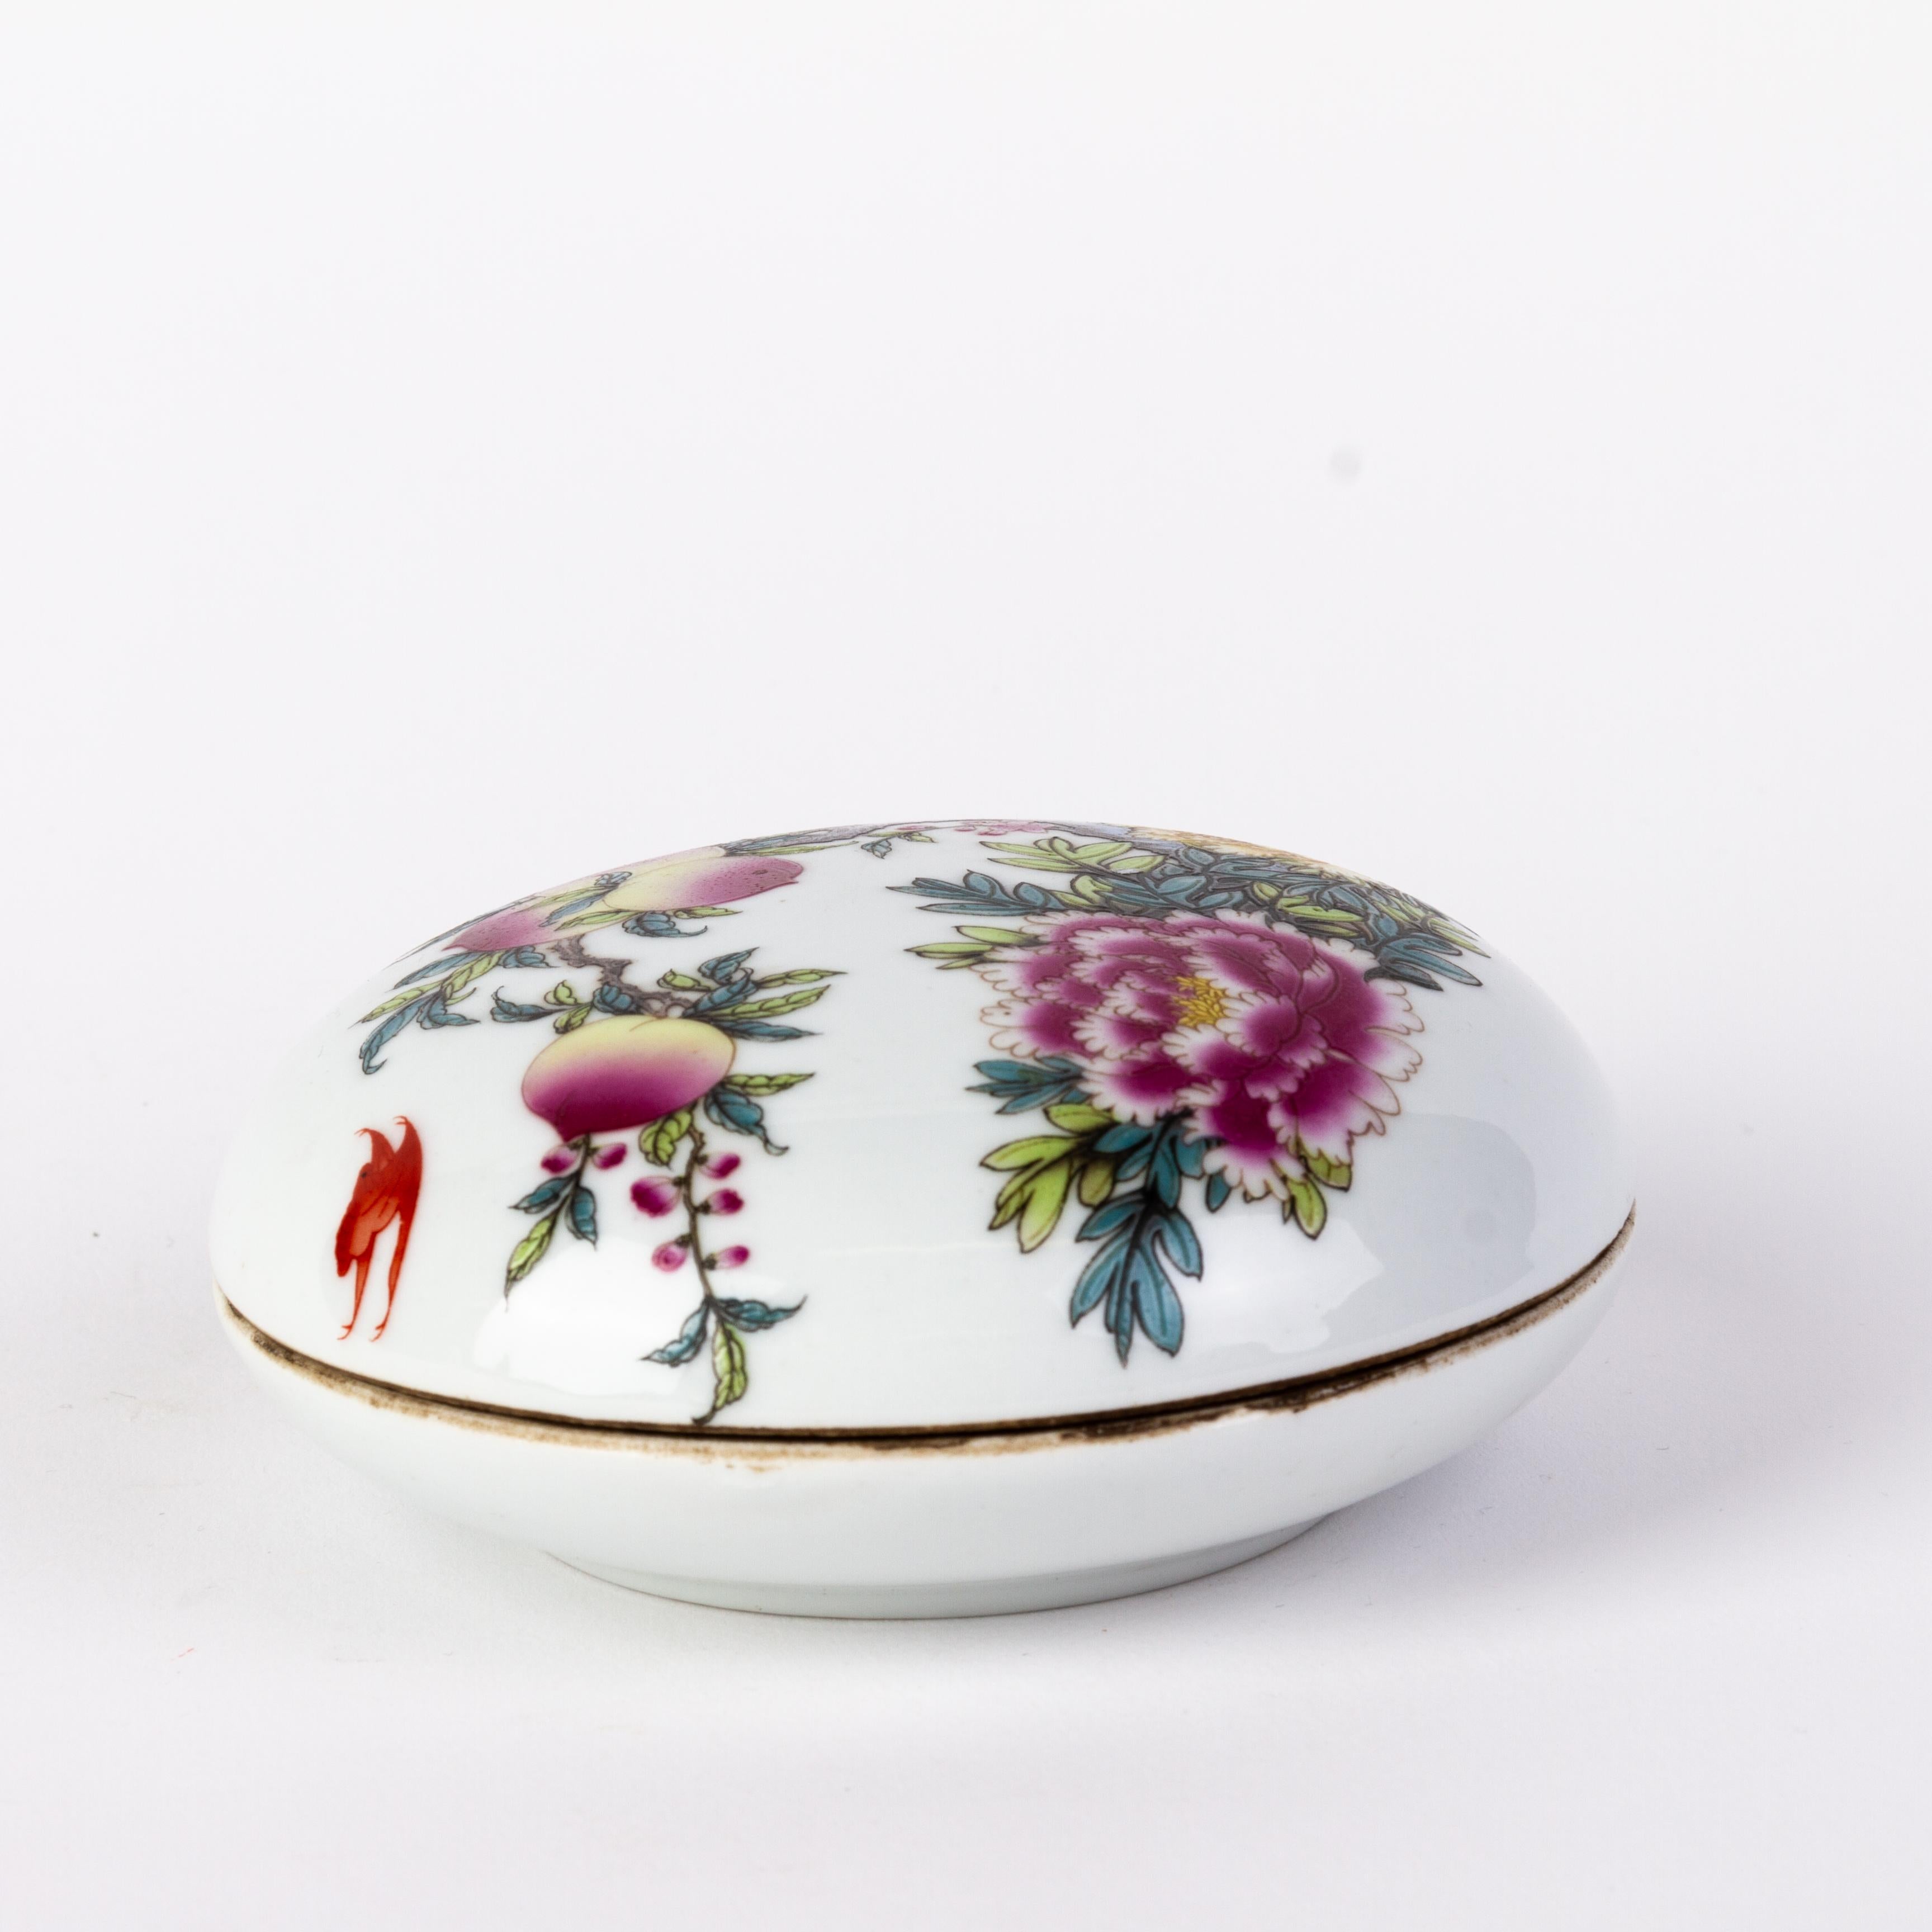 Chinese Republic Period Famille Rose Porcelain Lidded Box 
Good condition 
From a private collection.
Free international shipping.